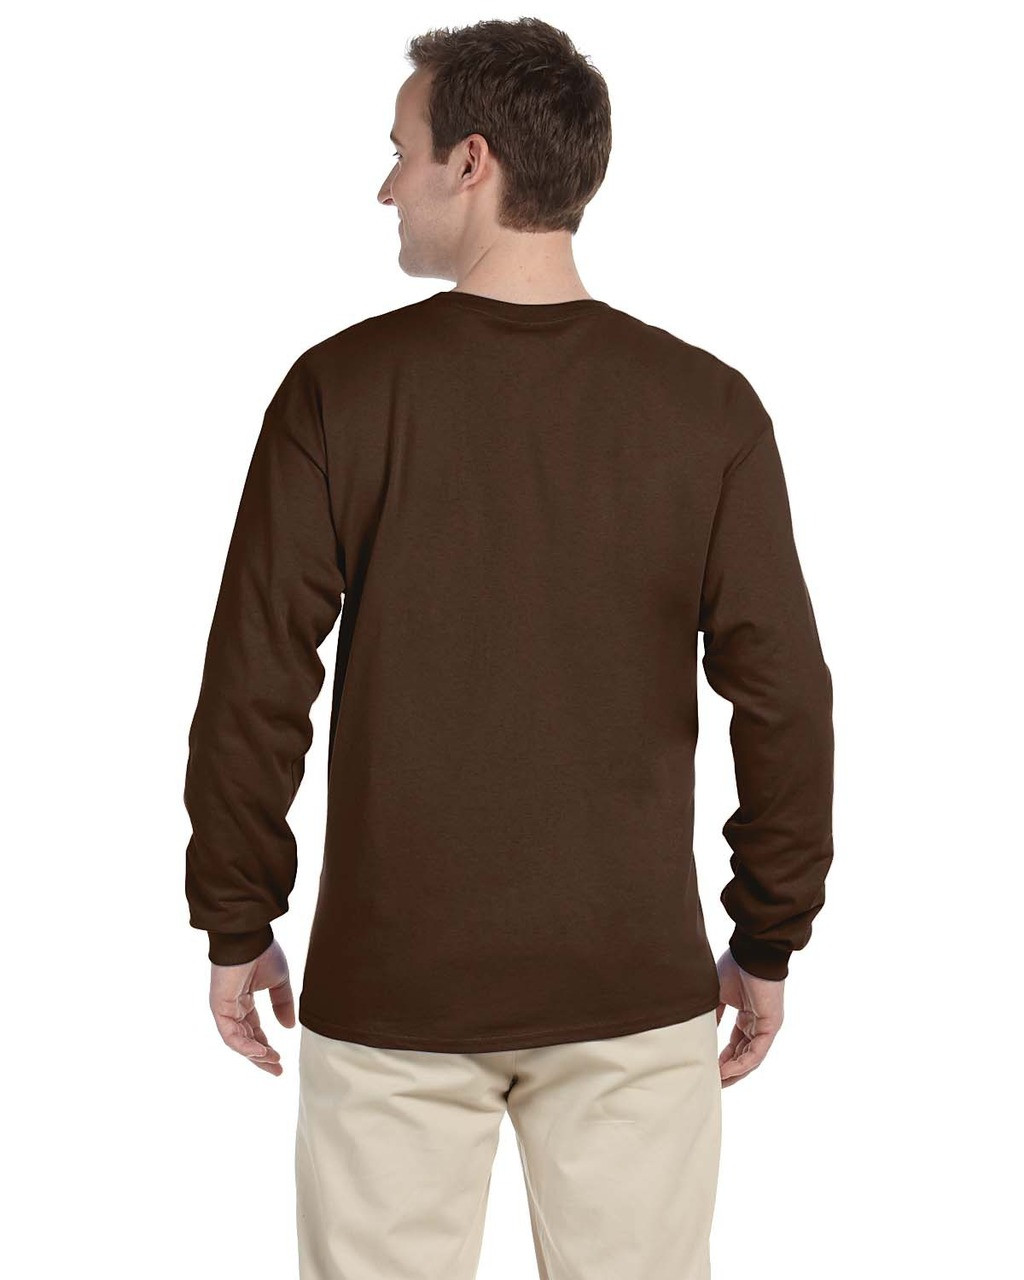 Fruit of the Loom 4930 Adult 5 oz. HD Cotton™ Long-Sleeve T-Shirt ...